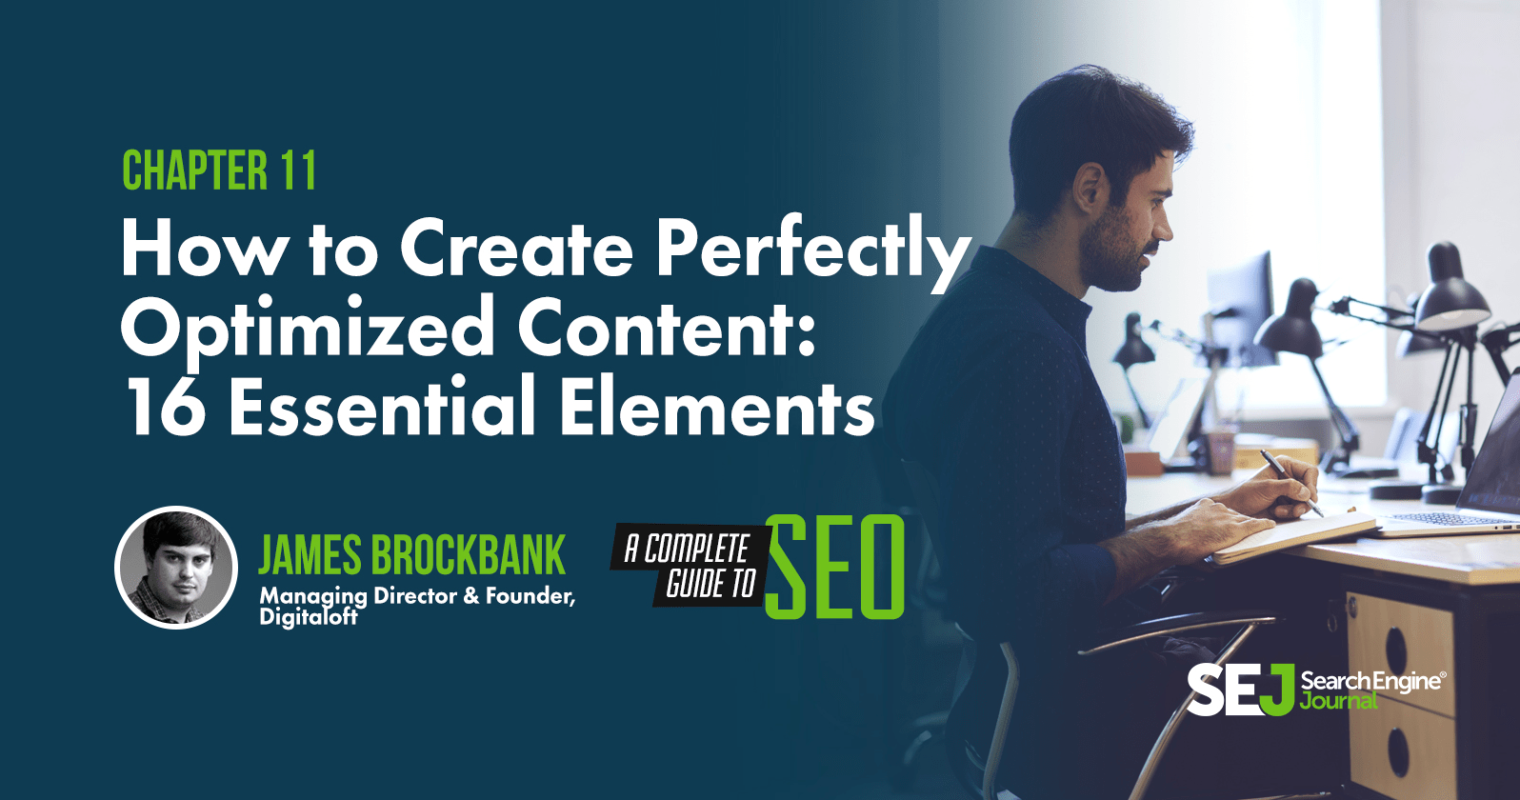 How to Create Perfectly Optimized Content: 16 Essential Elements